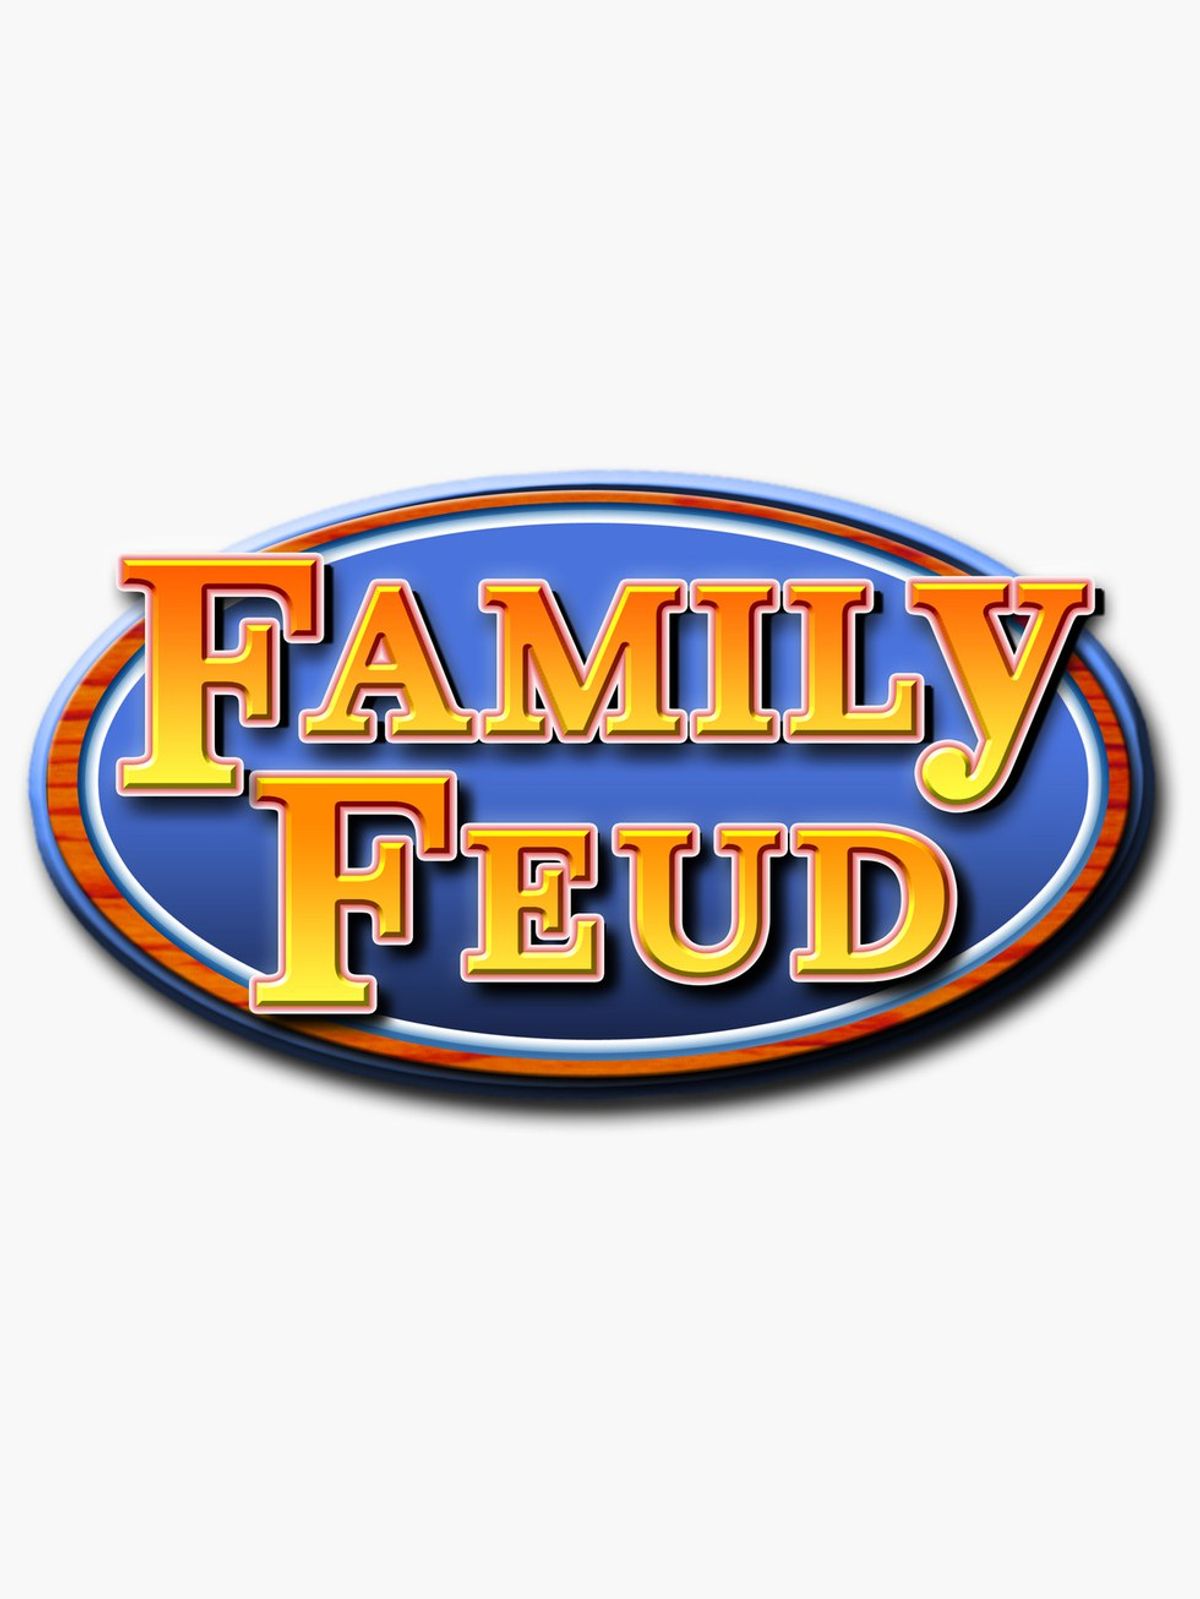 Why You Should Watch "Family Feud"